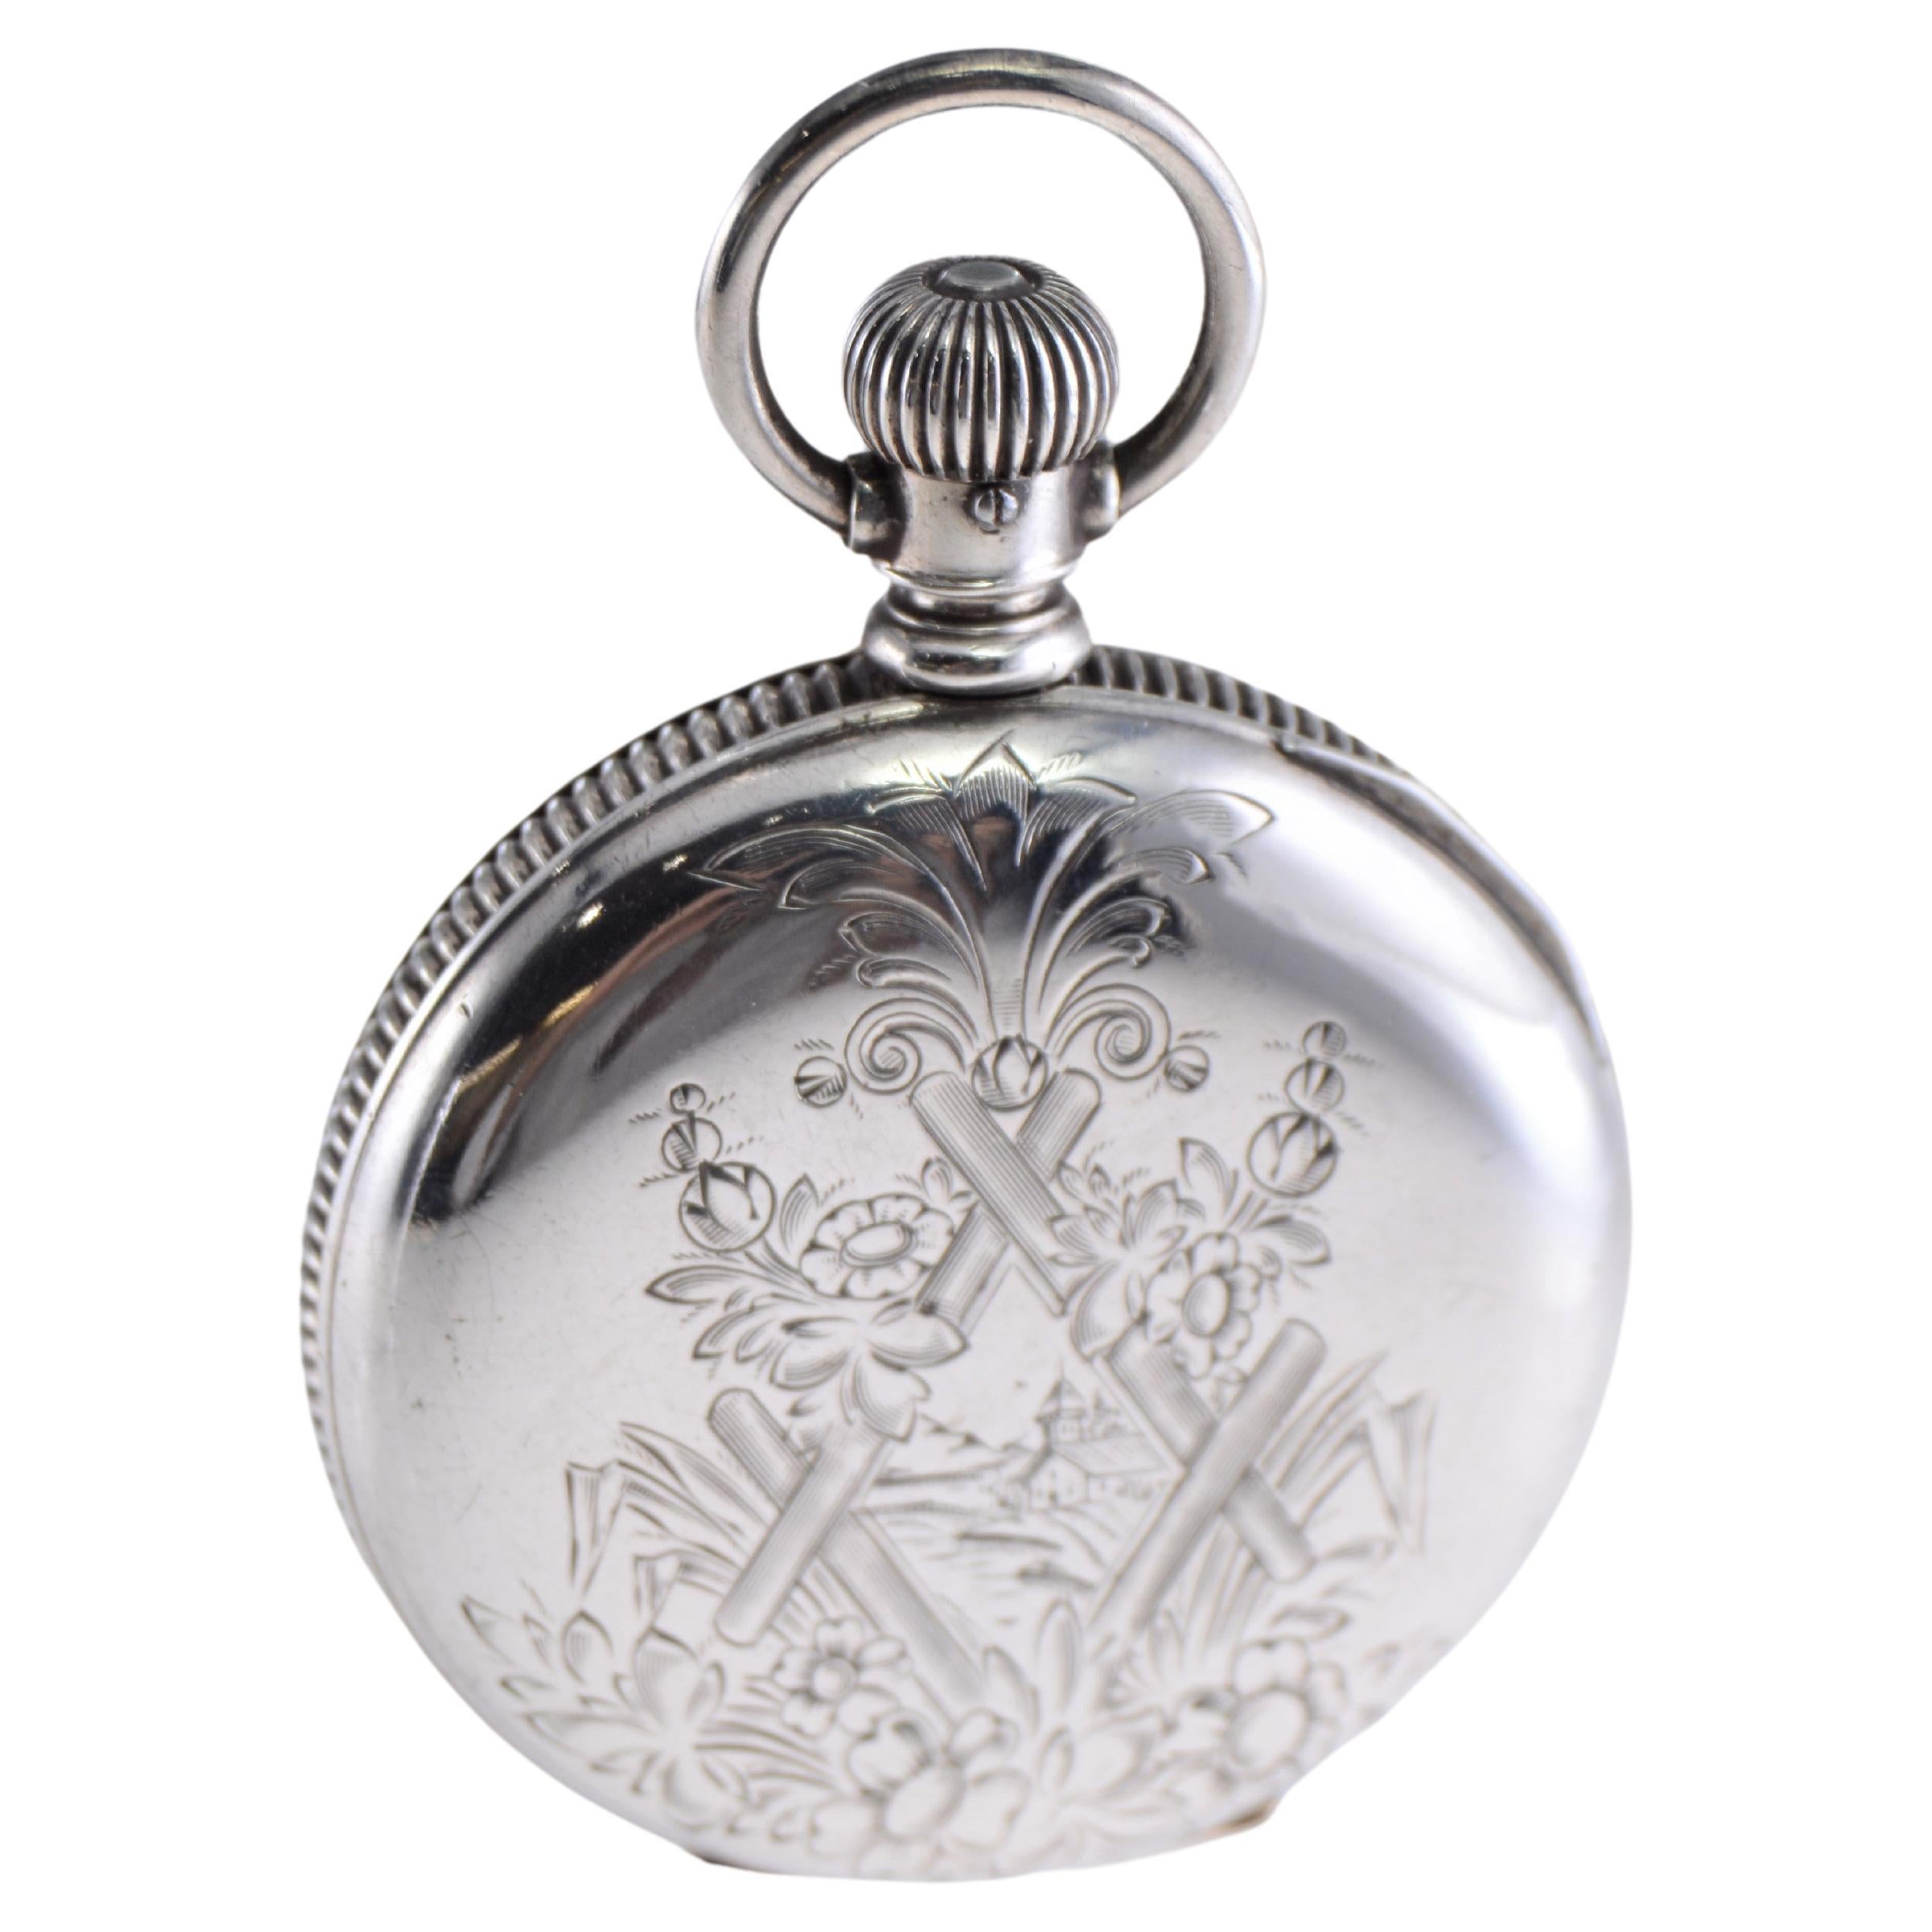 Illinois Silver Hunters Case Pocket Watch from 1893 with Pocket Watch Chain  6